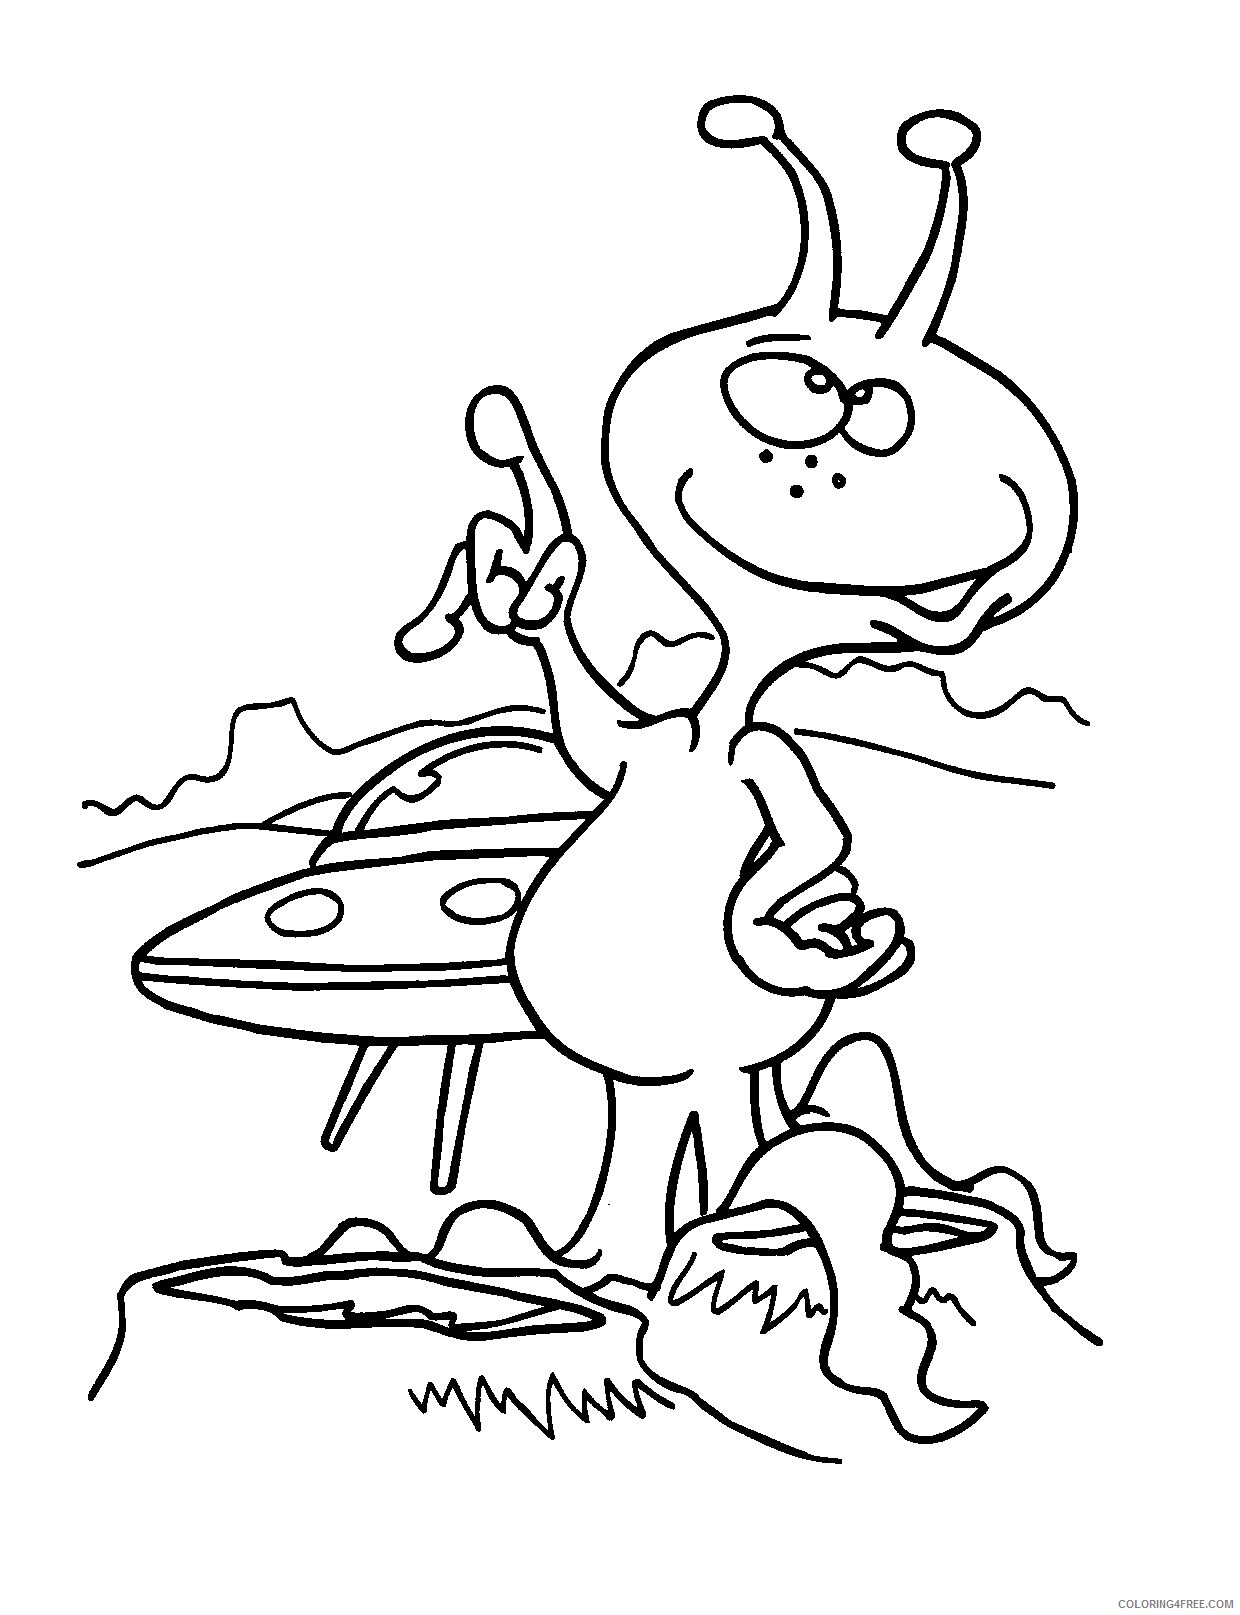 Alien Coloring Pages Alien Printable 2021 0123 Coloring4free